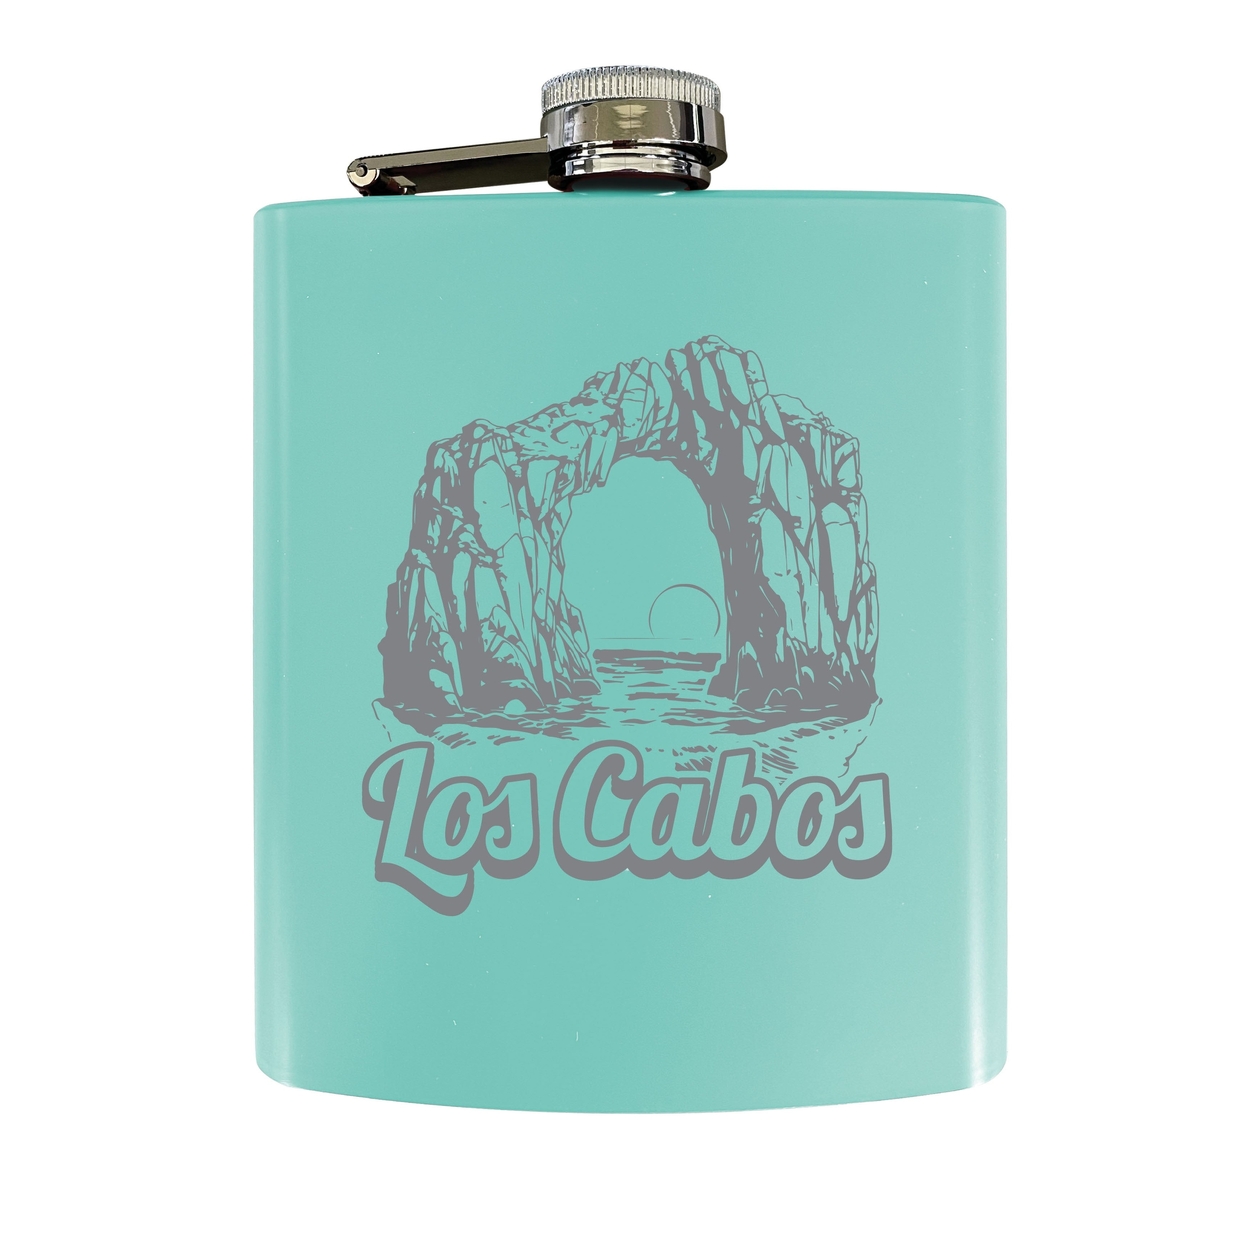 Los Cabos Mexico Souvenir 7 Oz Engraved Steel Flask Matte Finish - Navy,,2-Pack